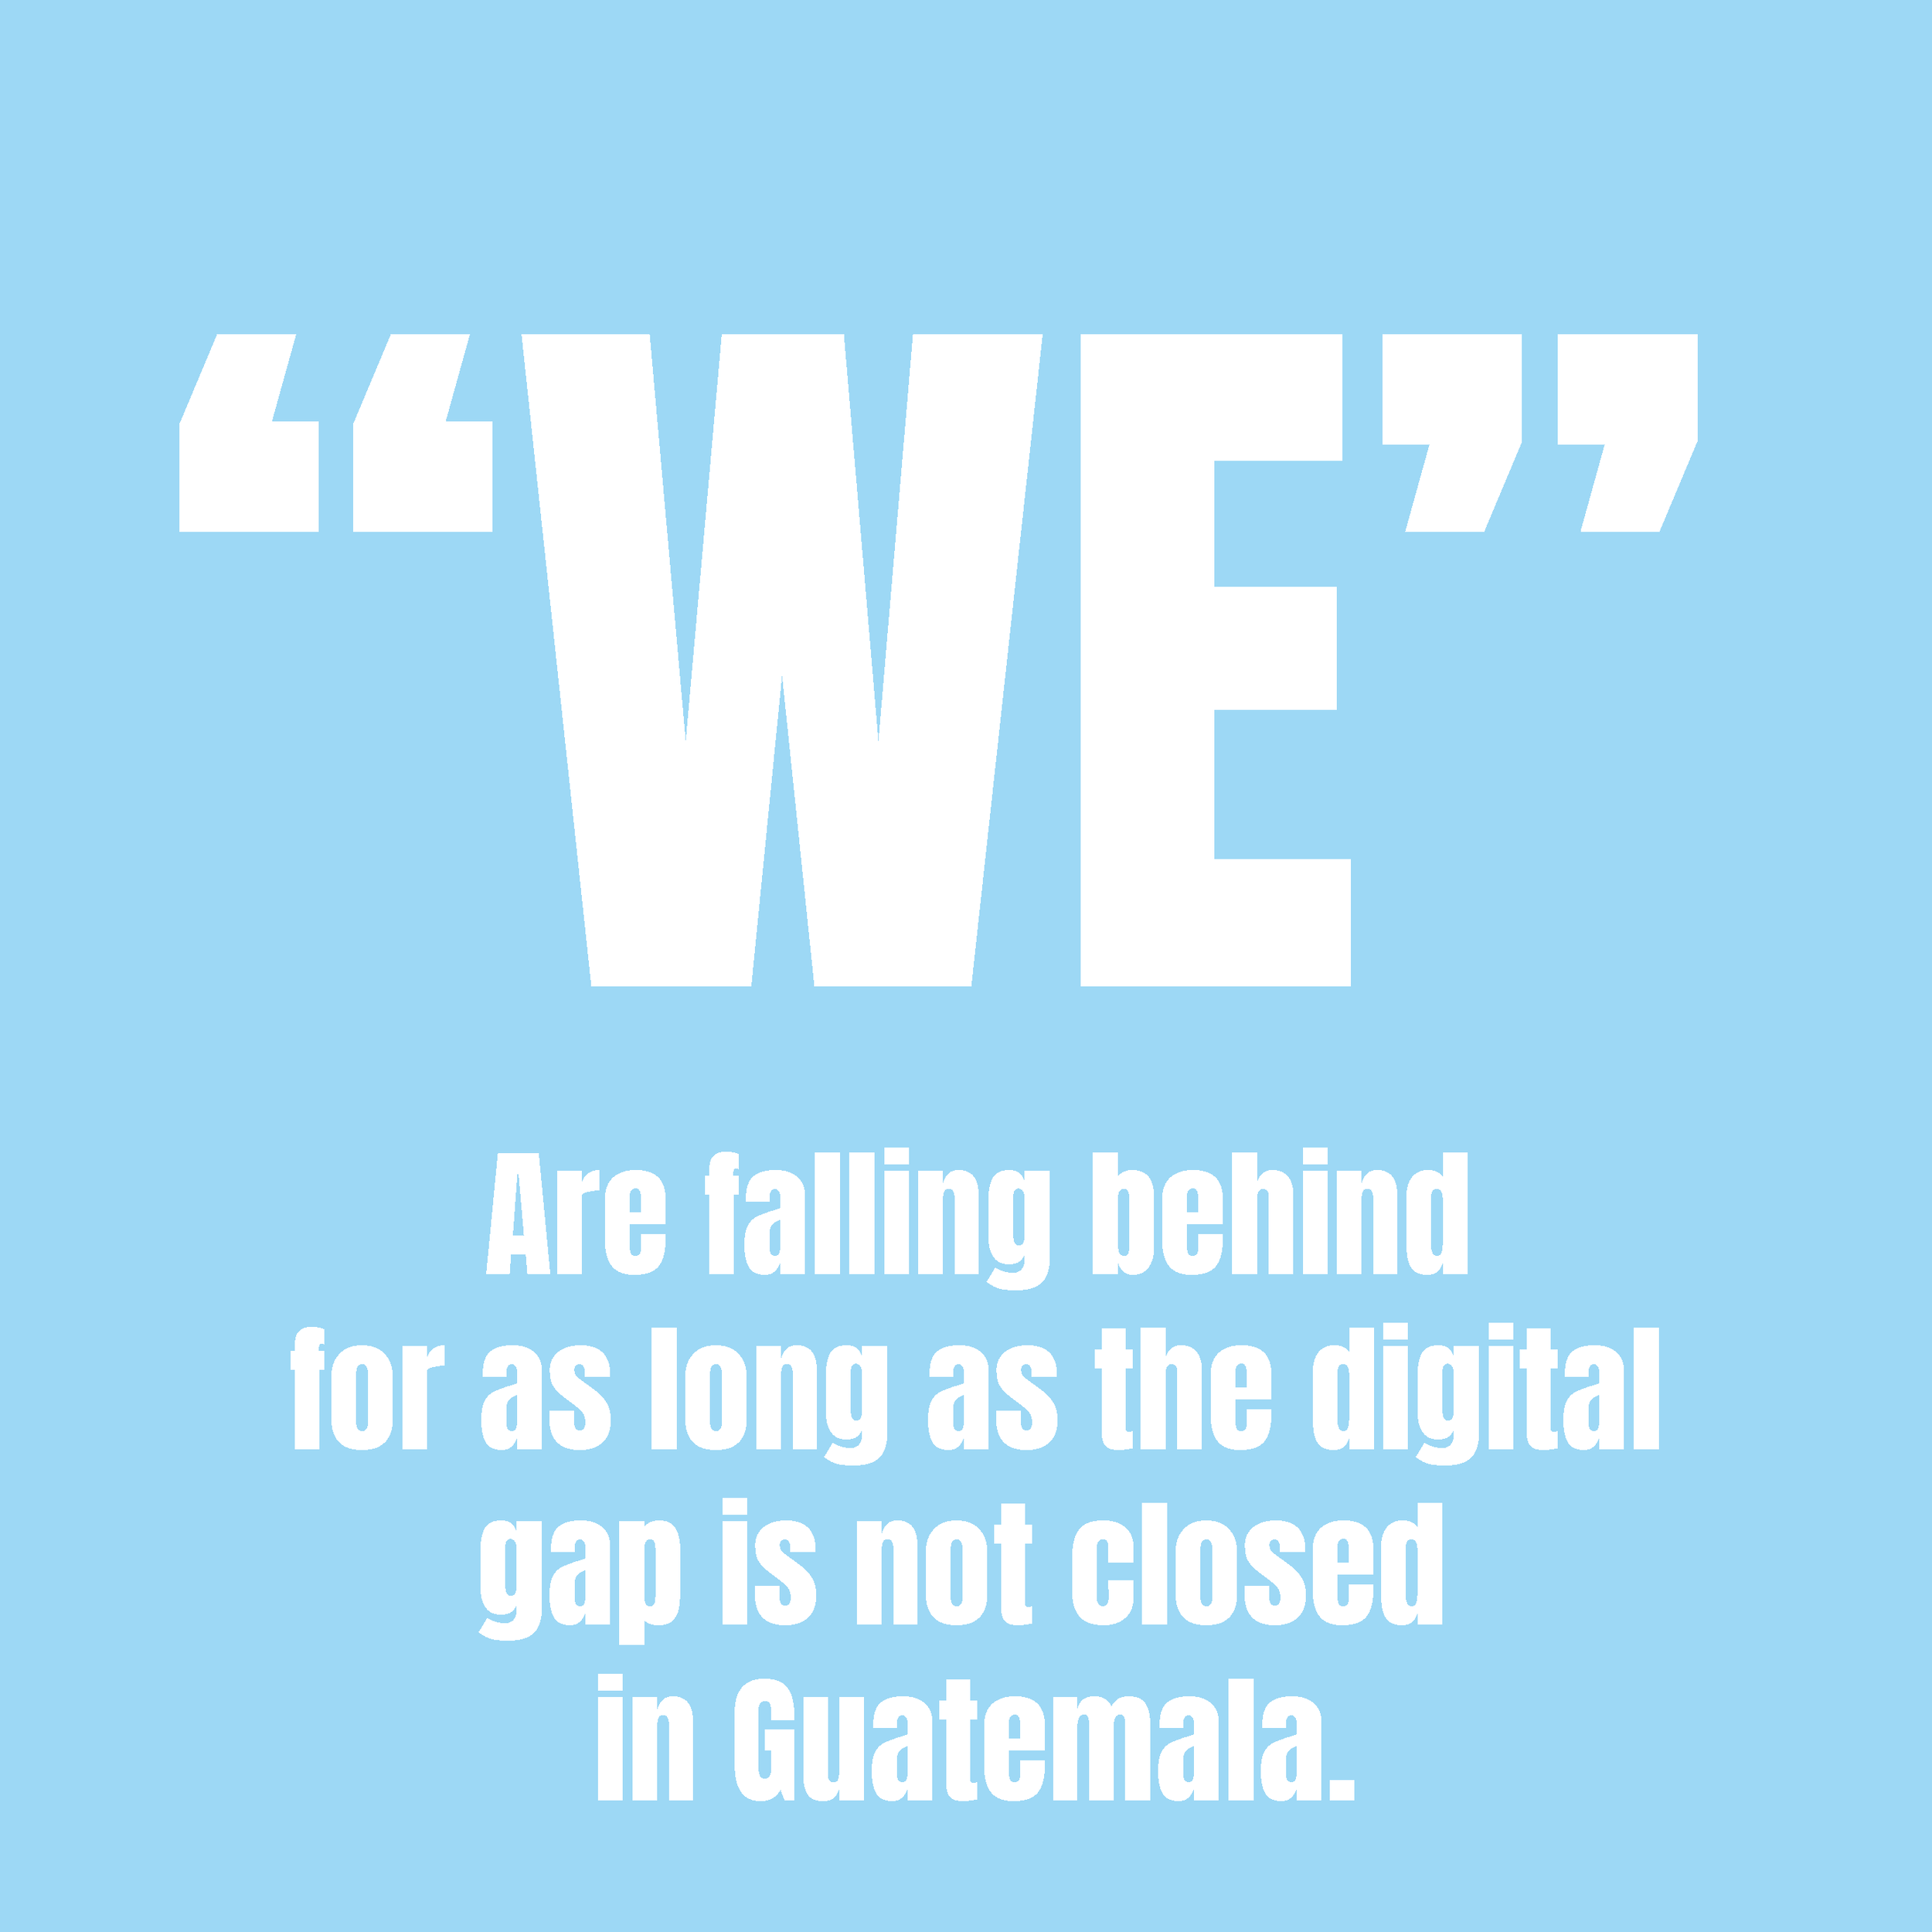  The digital gap in Guatemala is not narrowing; in fact, it is growing by leaps and bounds as technology increases, and our schools and children are left behind. 